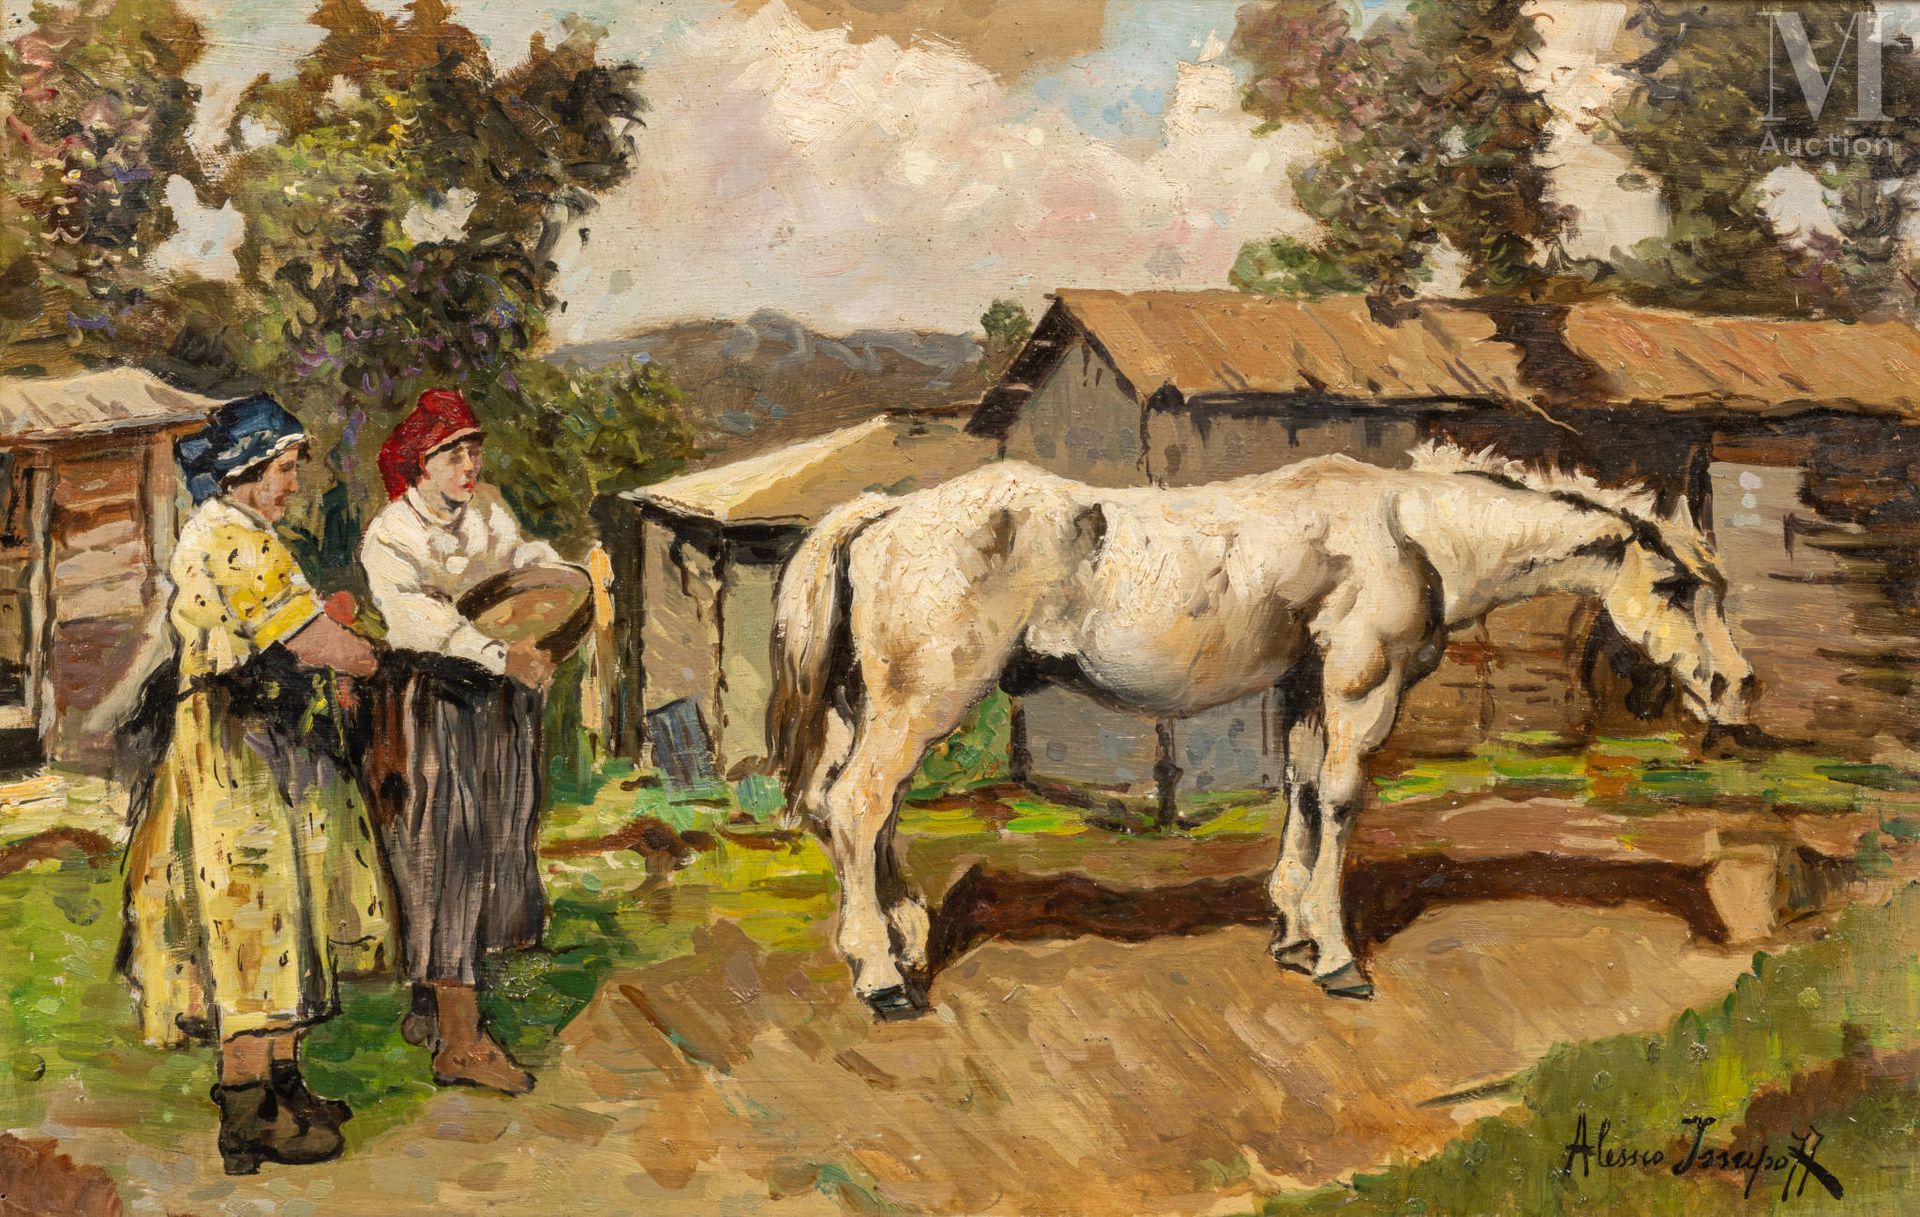 Alexis ISSUPOFF (Kirov 1889 - Rome 1957) Russian village girls and white horse

&hellip;